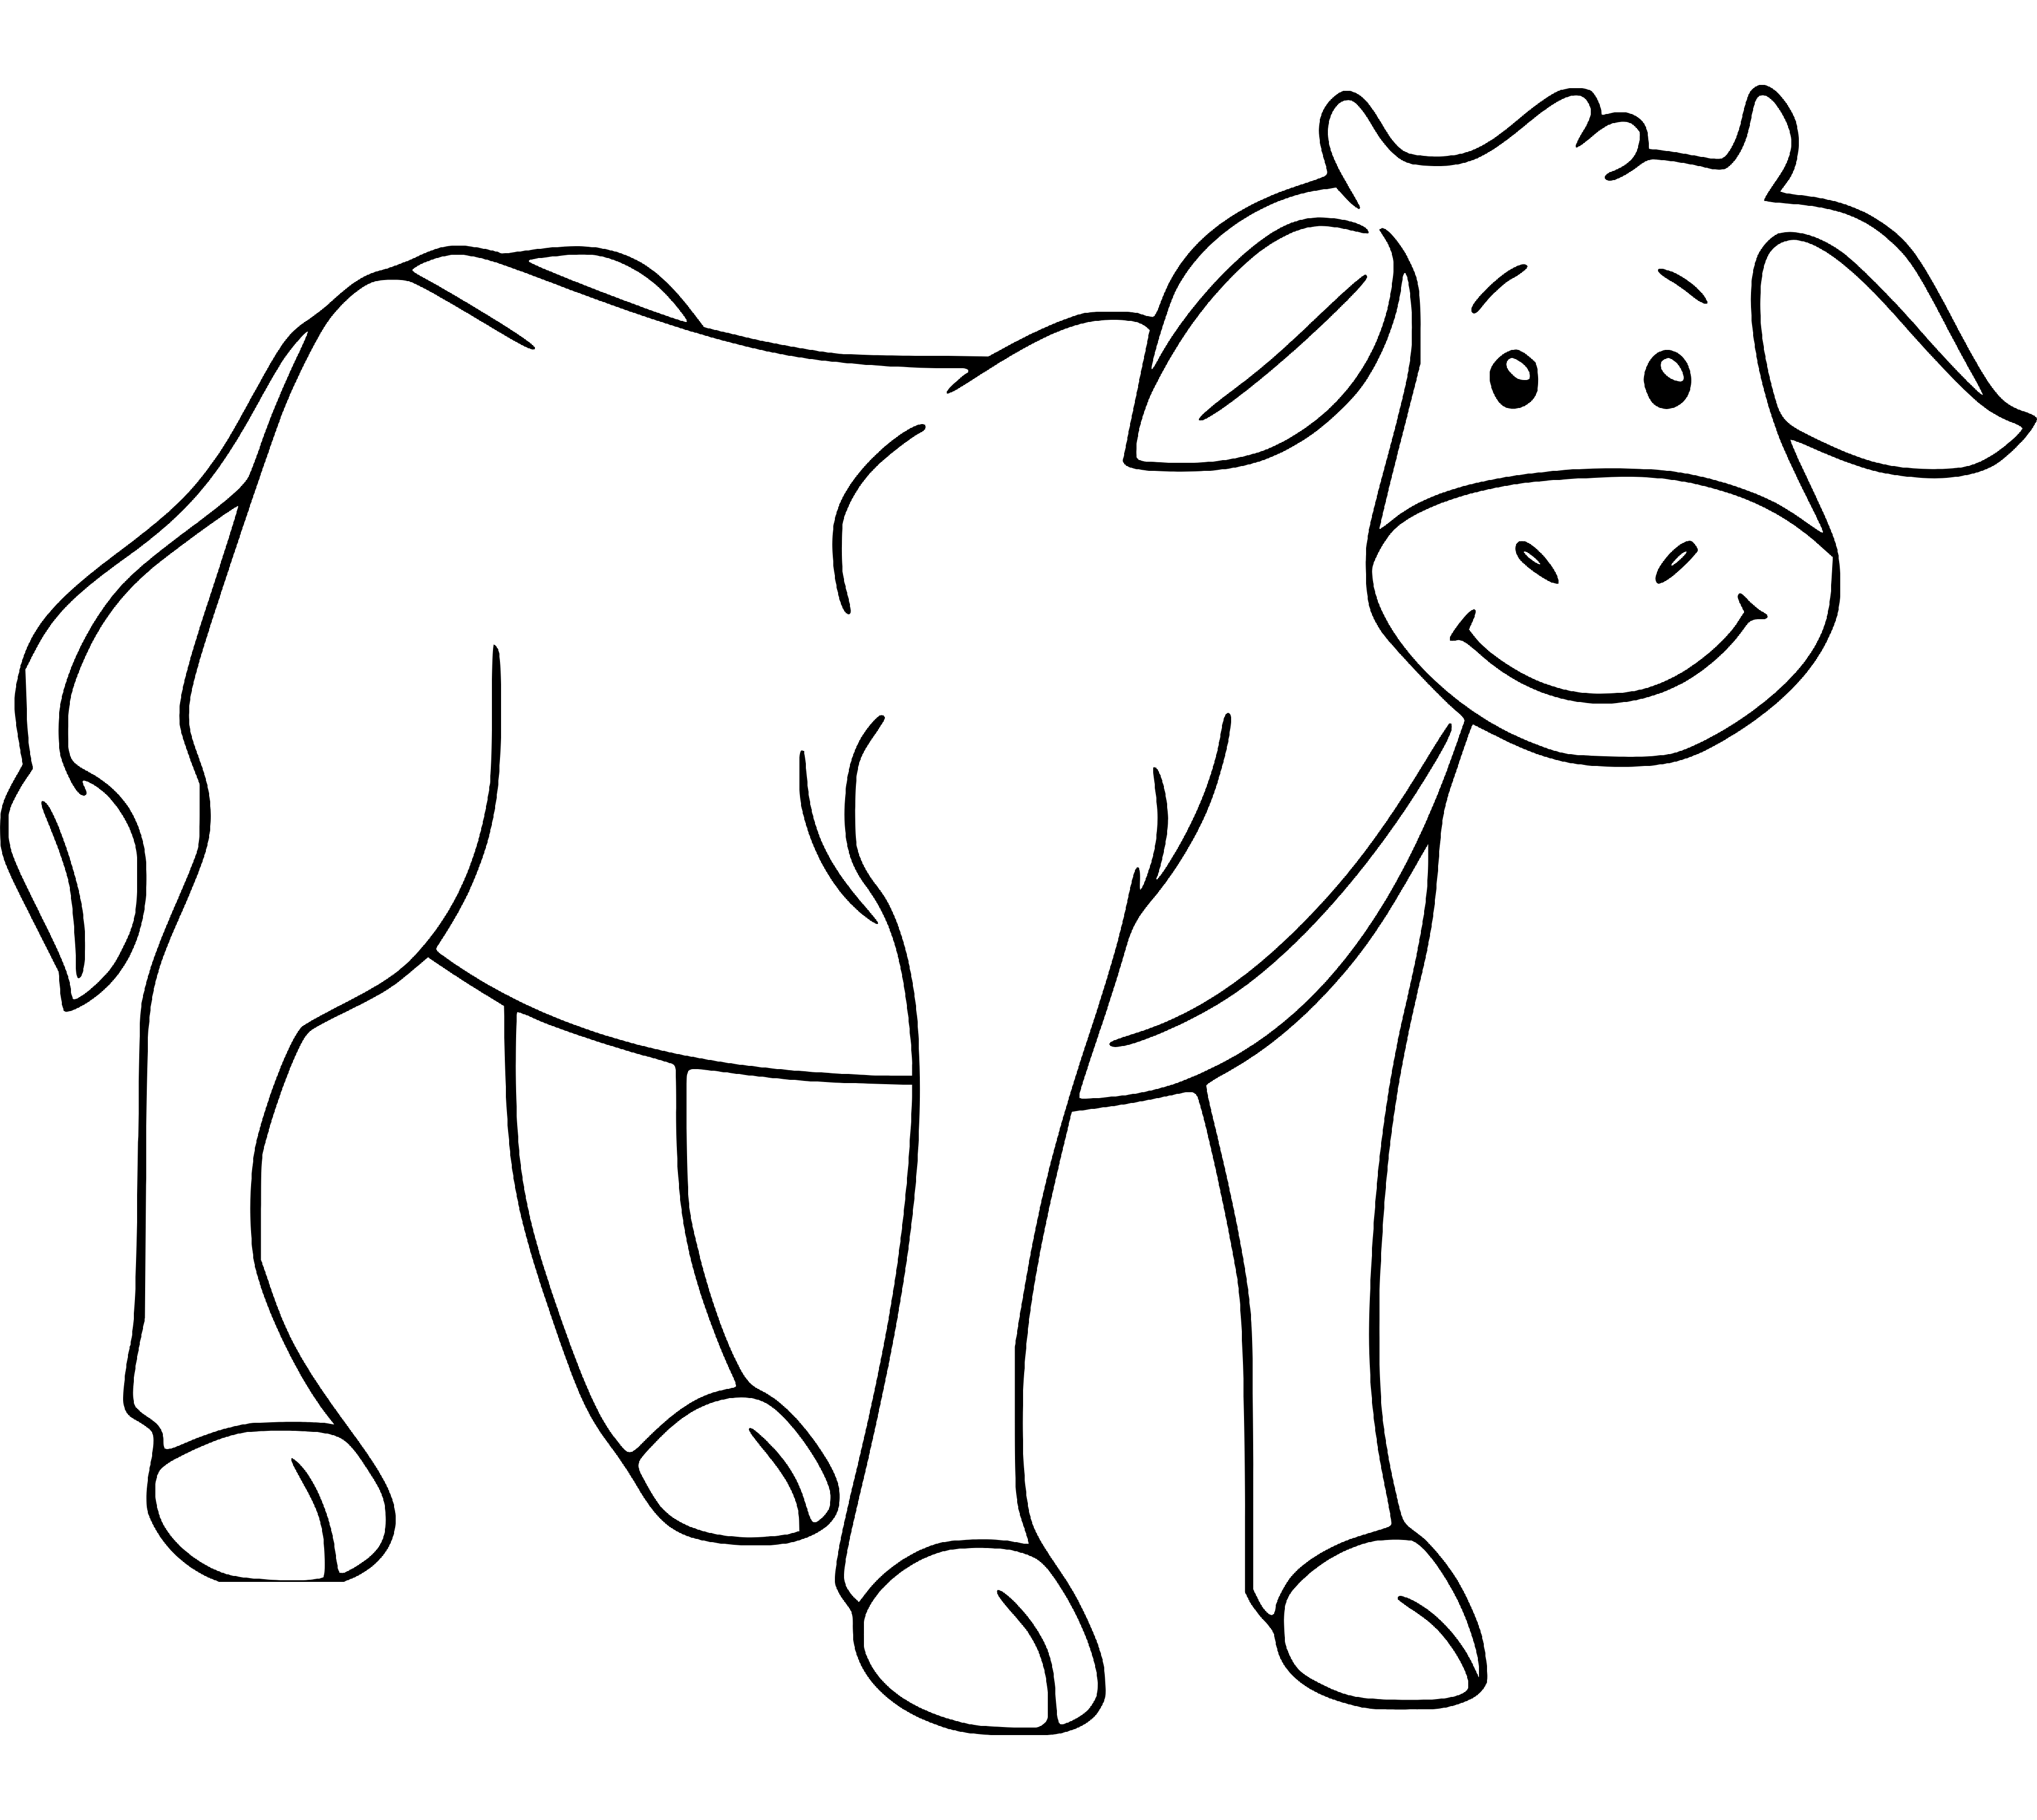 Printable Cute Cow Coloring Page for kids.